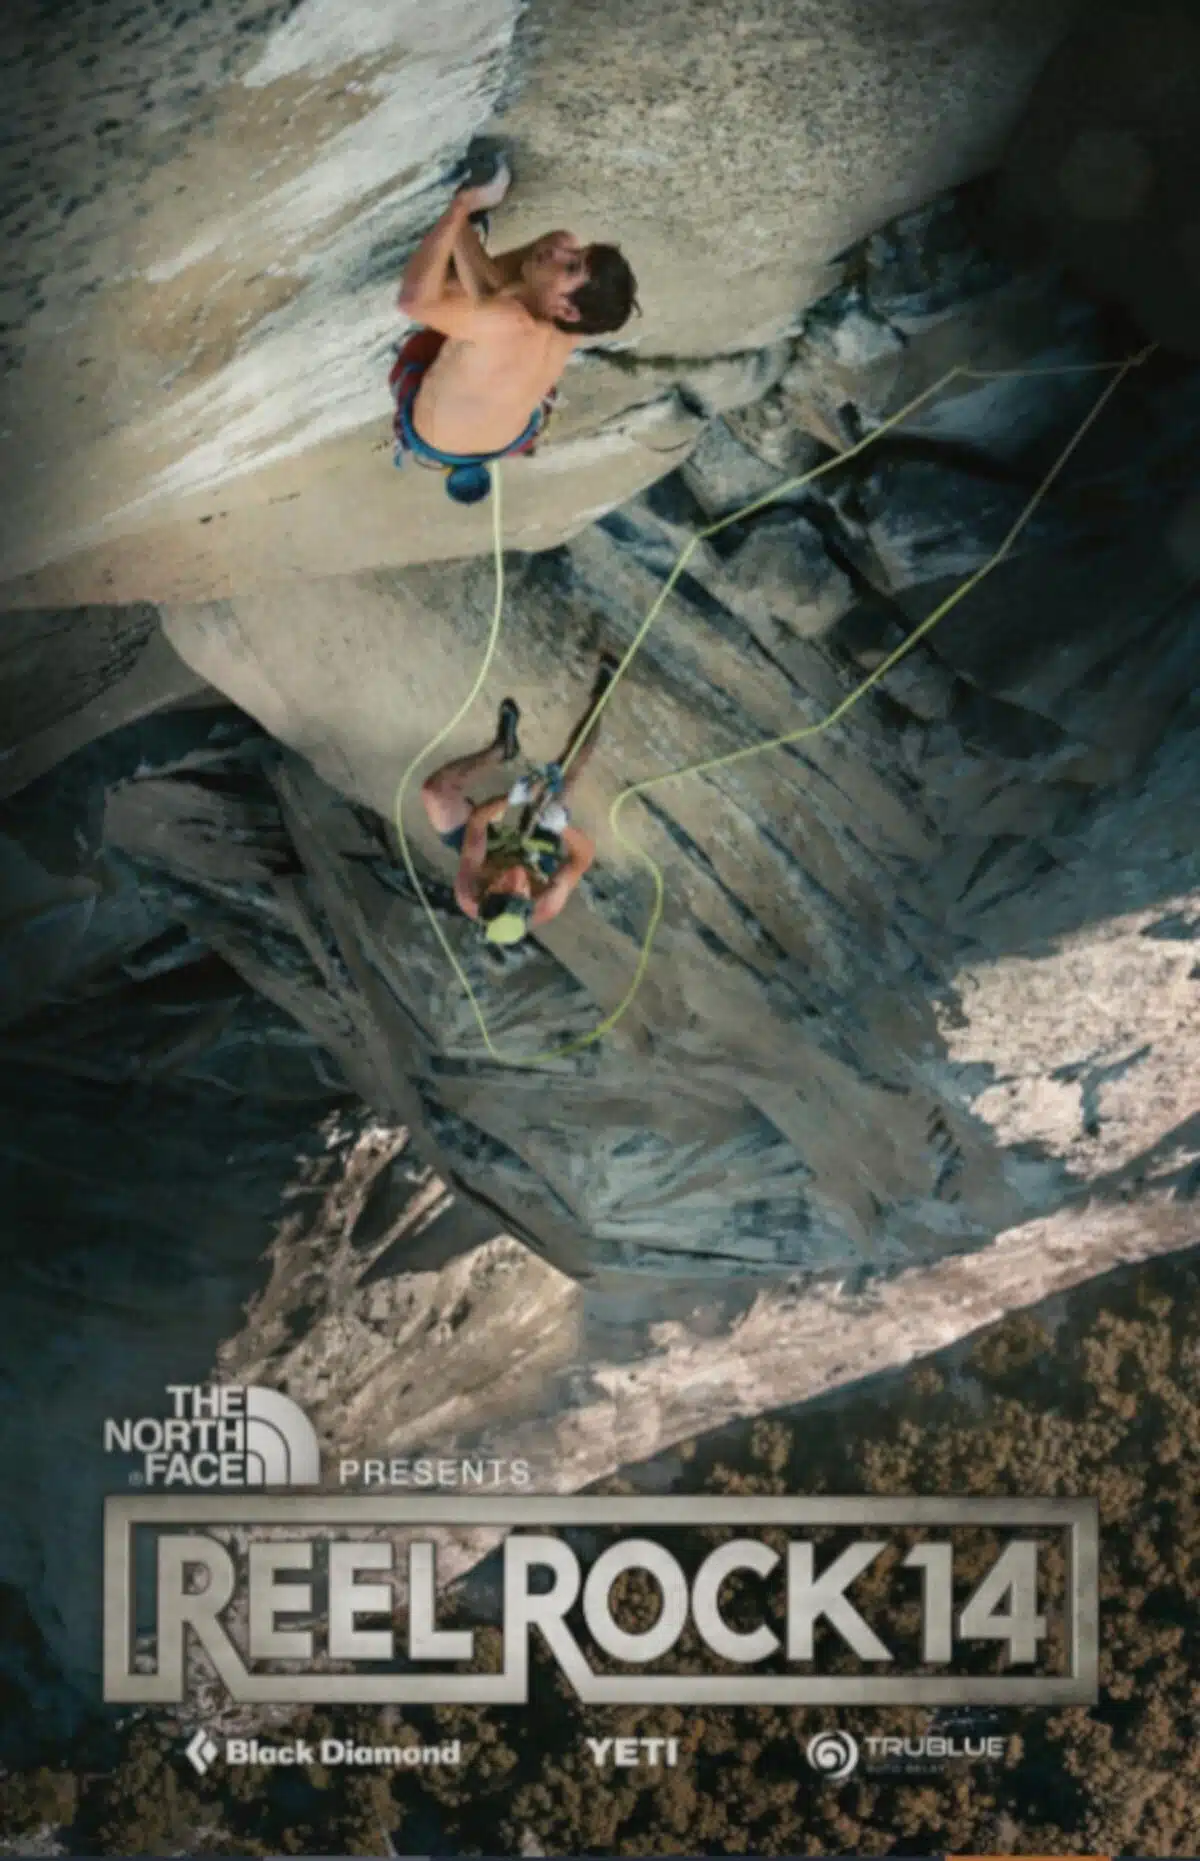 I can’t say enough positive things about this 3-part movie about rock climbing!